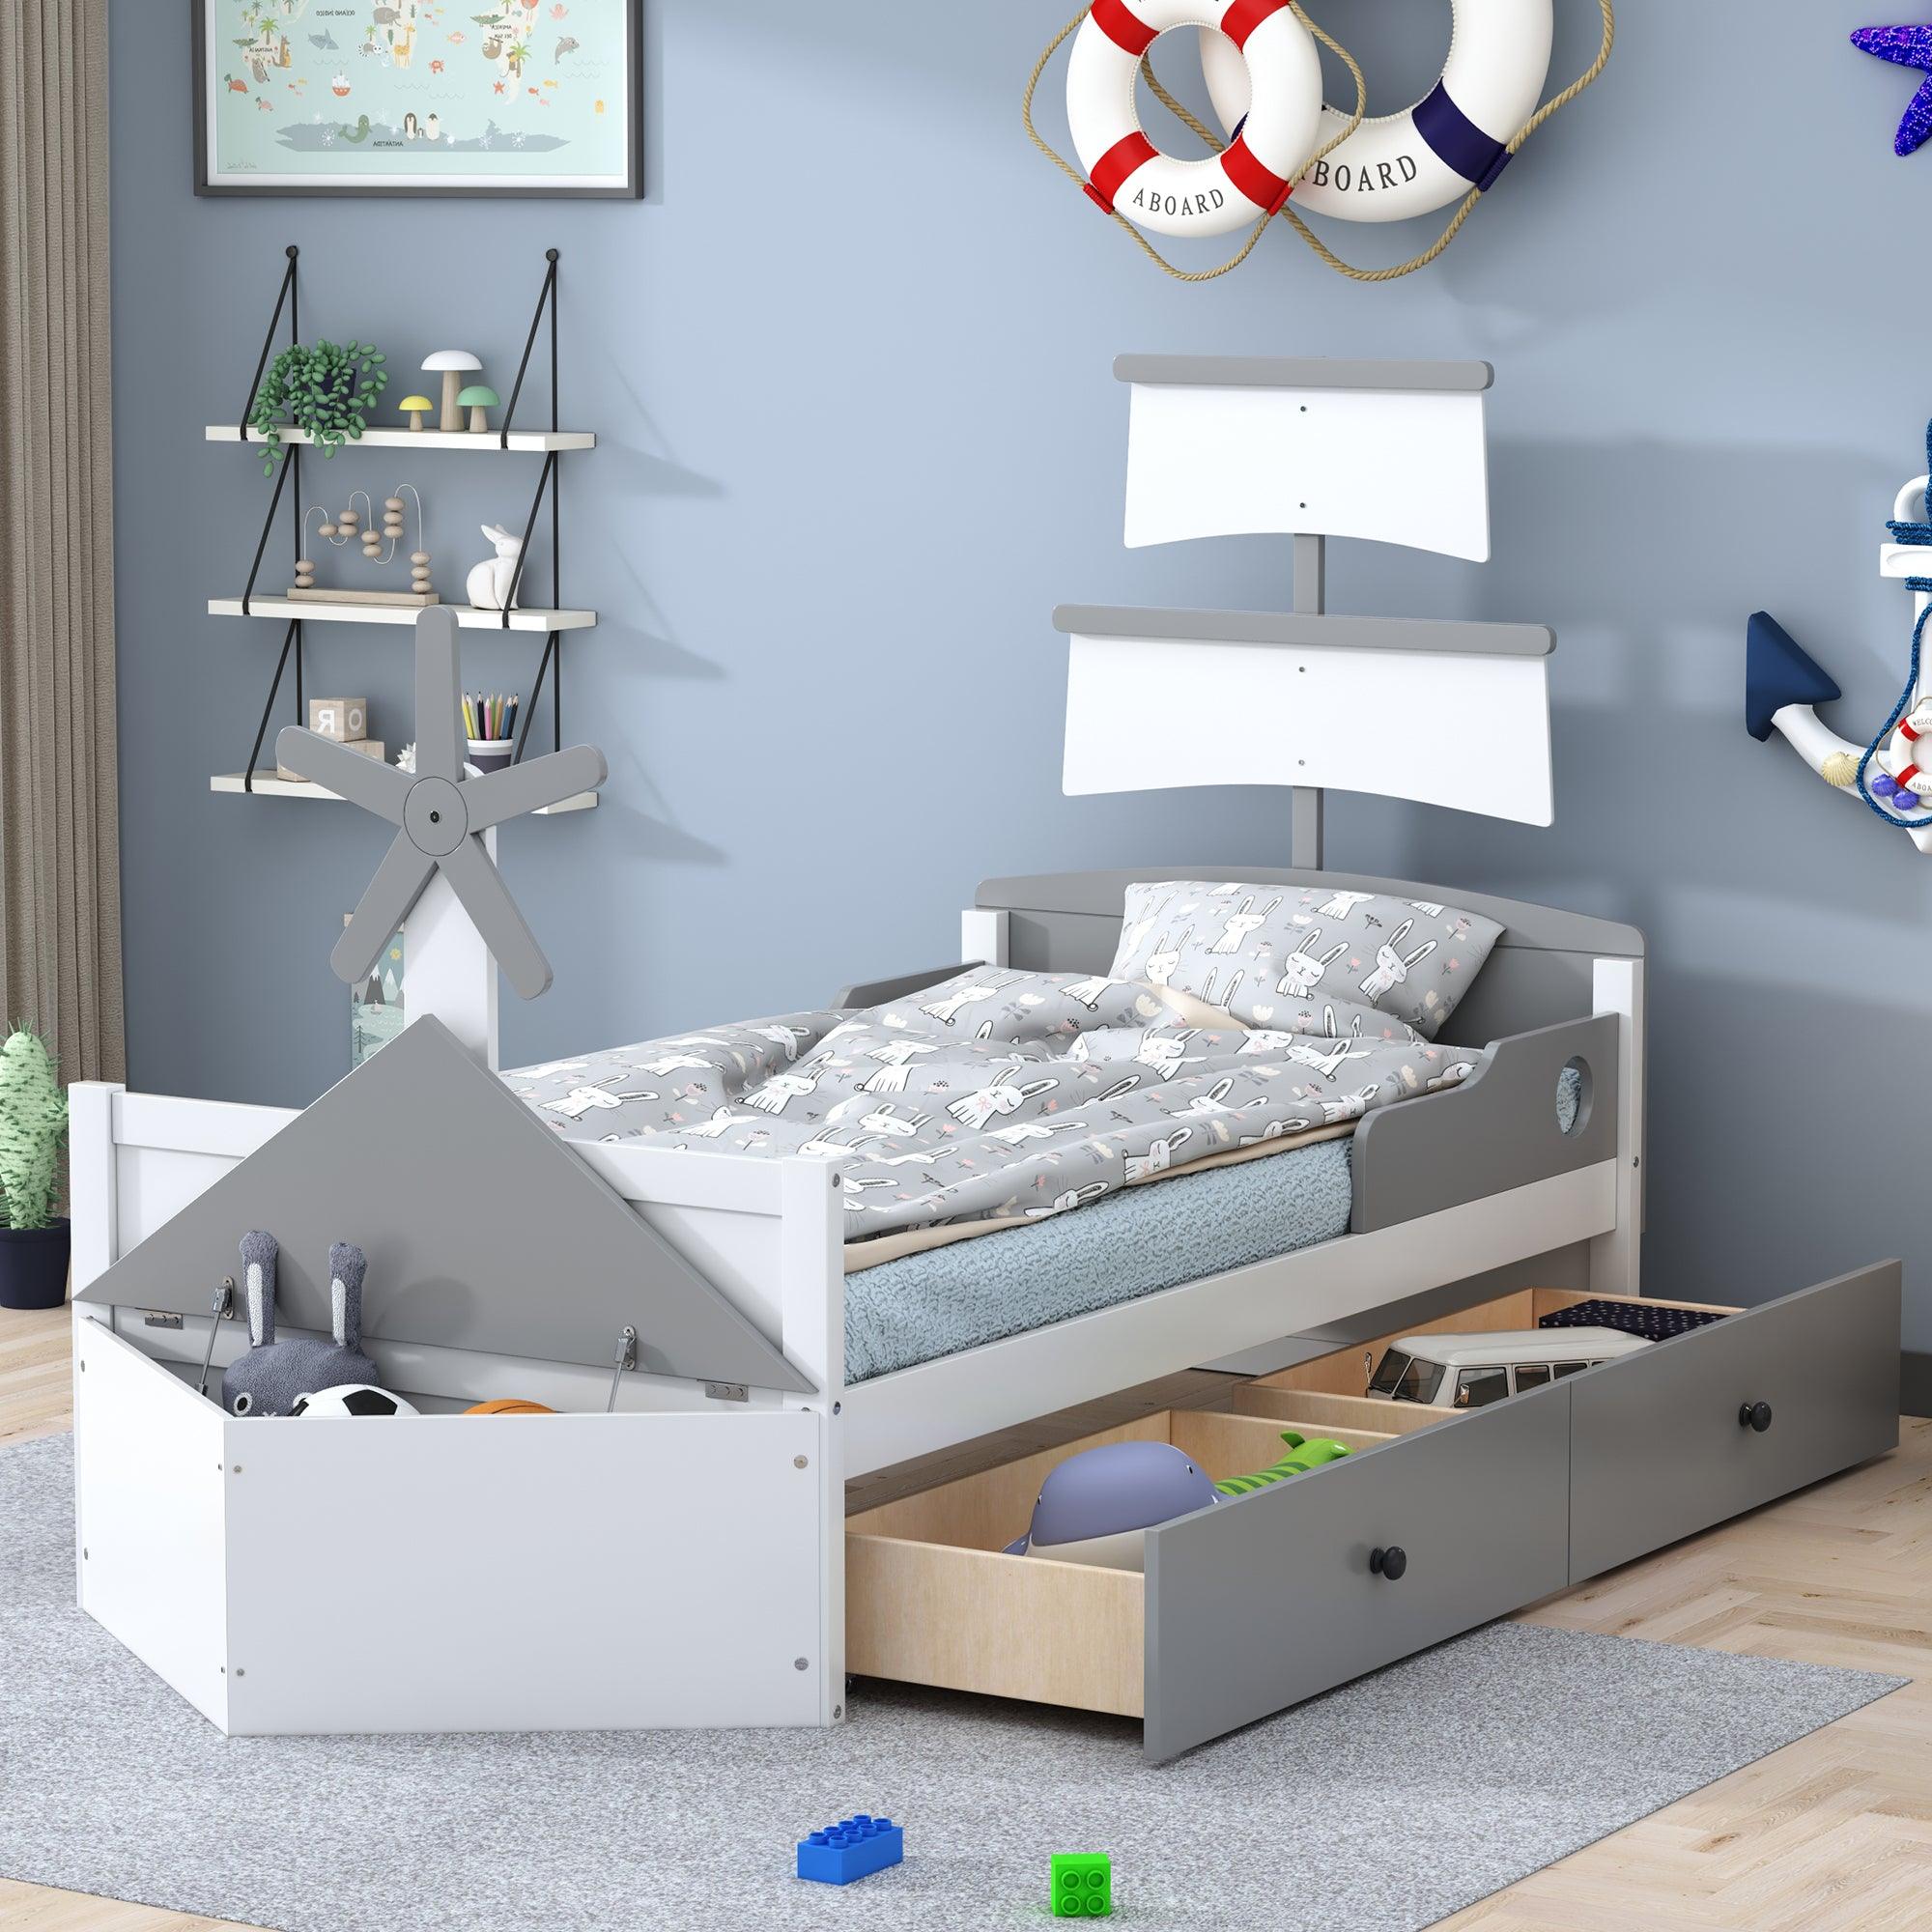 🆓🚛 Twin Size Boat-Shaped Platform Bed With 2 Drawers, Twin Bed With Storage for Bedroom, Gray